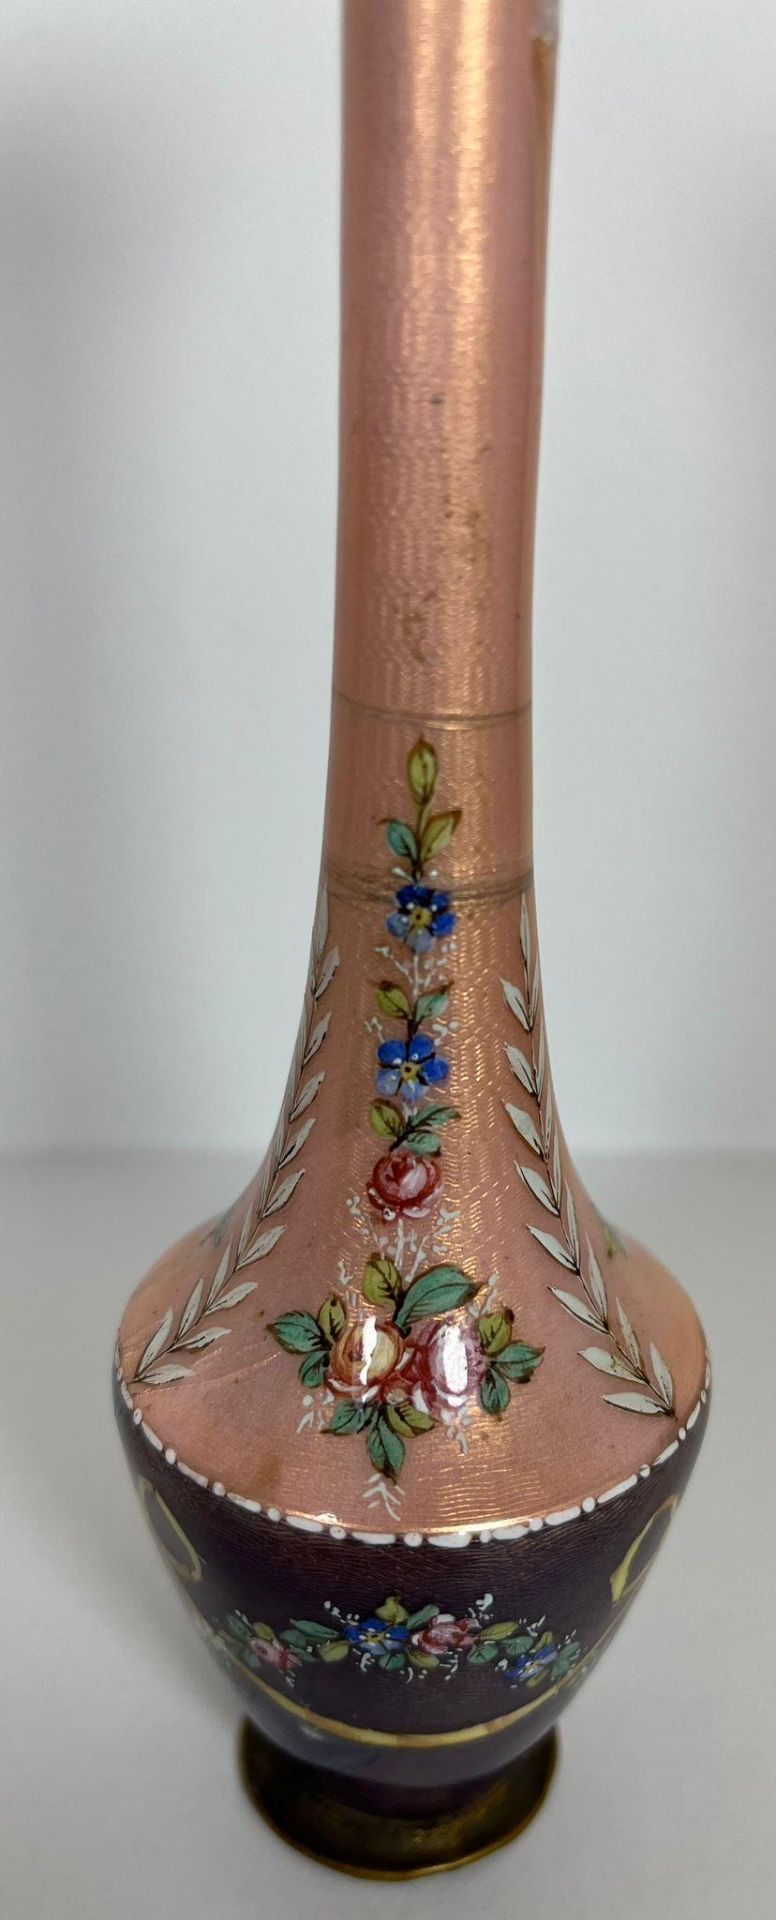 AN ANTIQUE EUROPEAN PINK & PURPLE ENAMEL DESIGN VASE DECORATED WITH FLORAL SWAG DESIGN, HEIGHT 15. - Image 4 of 5